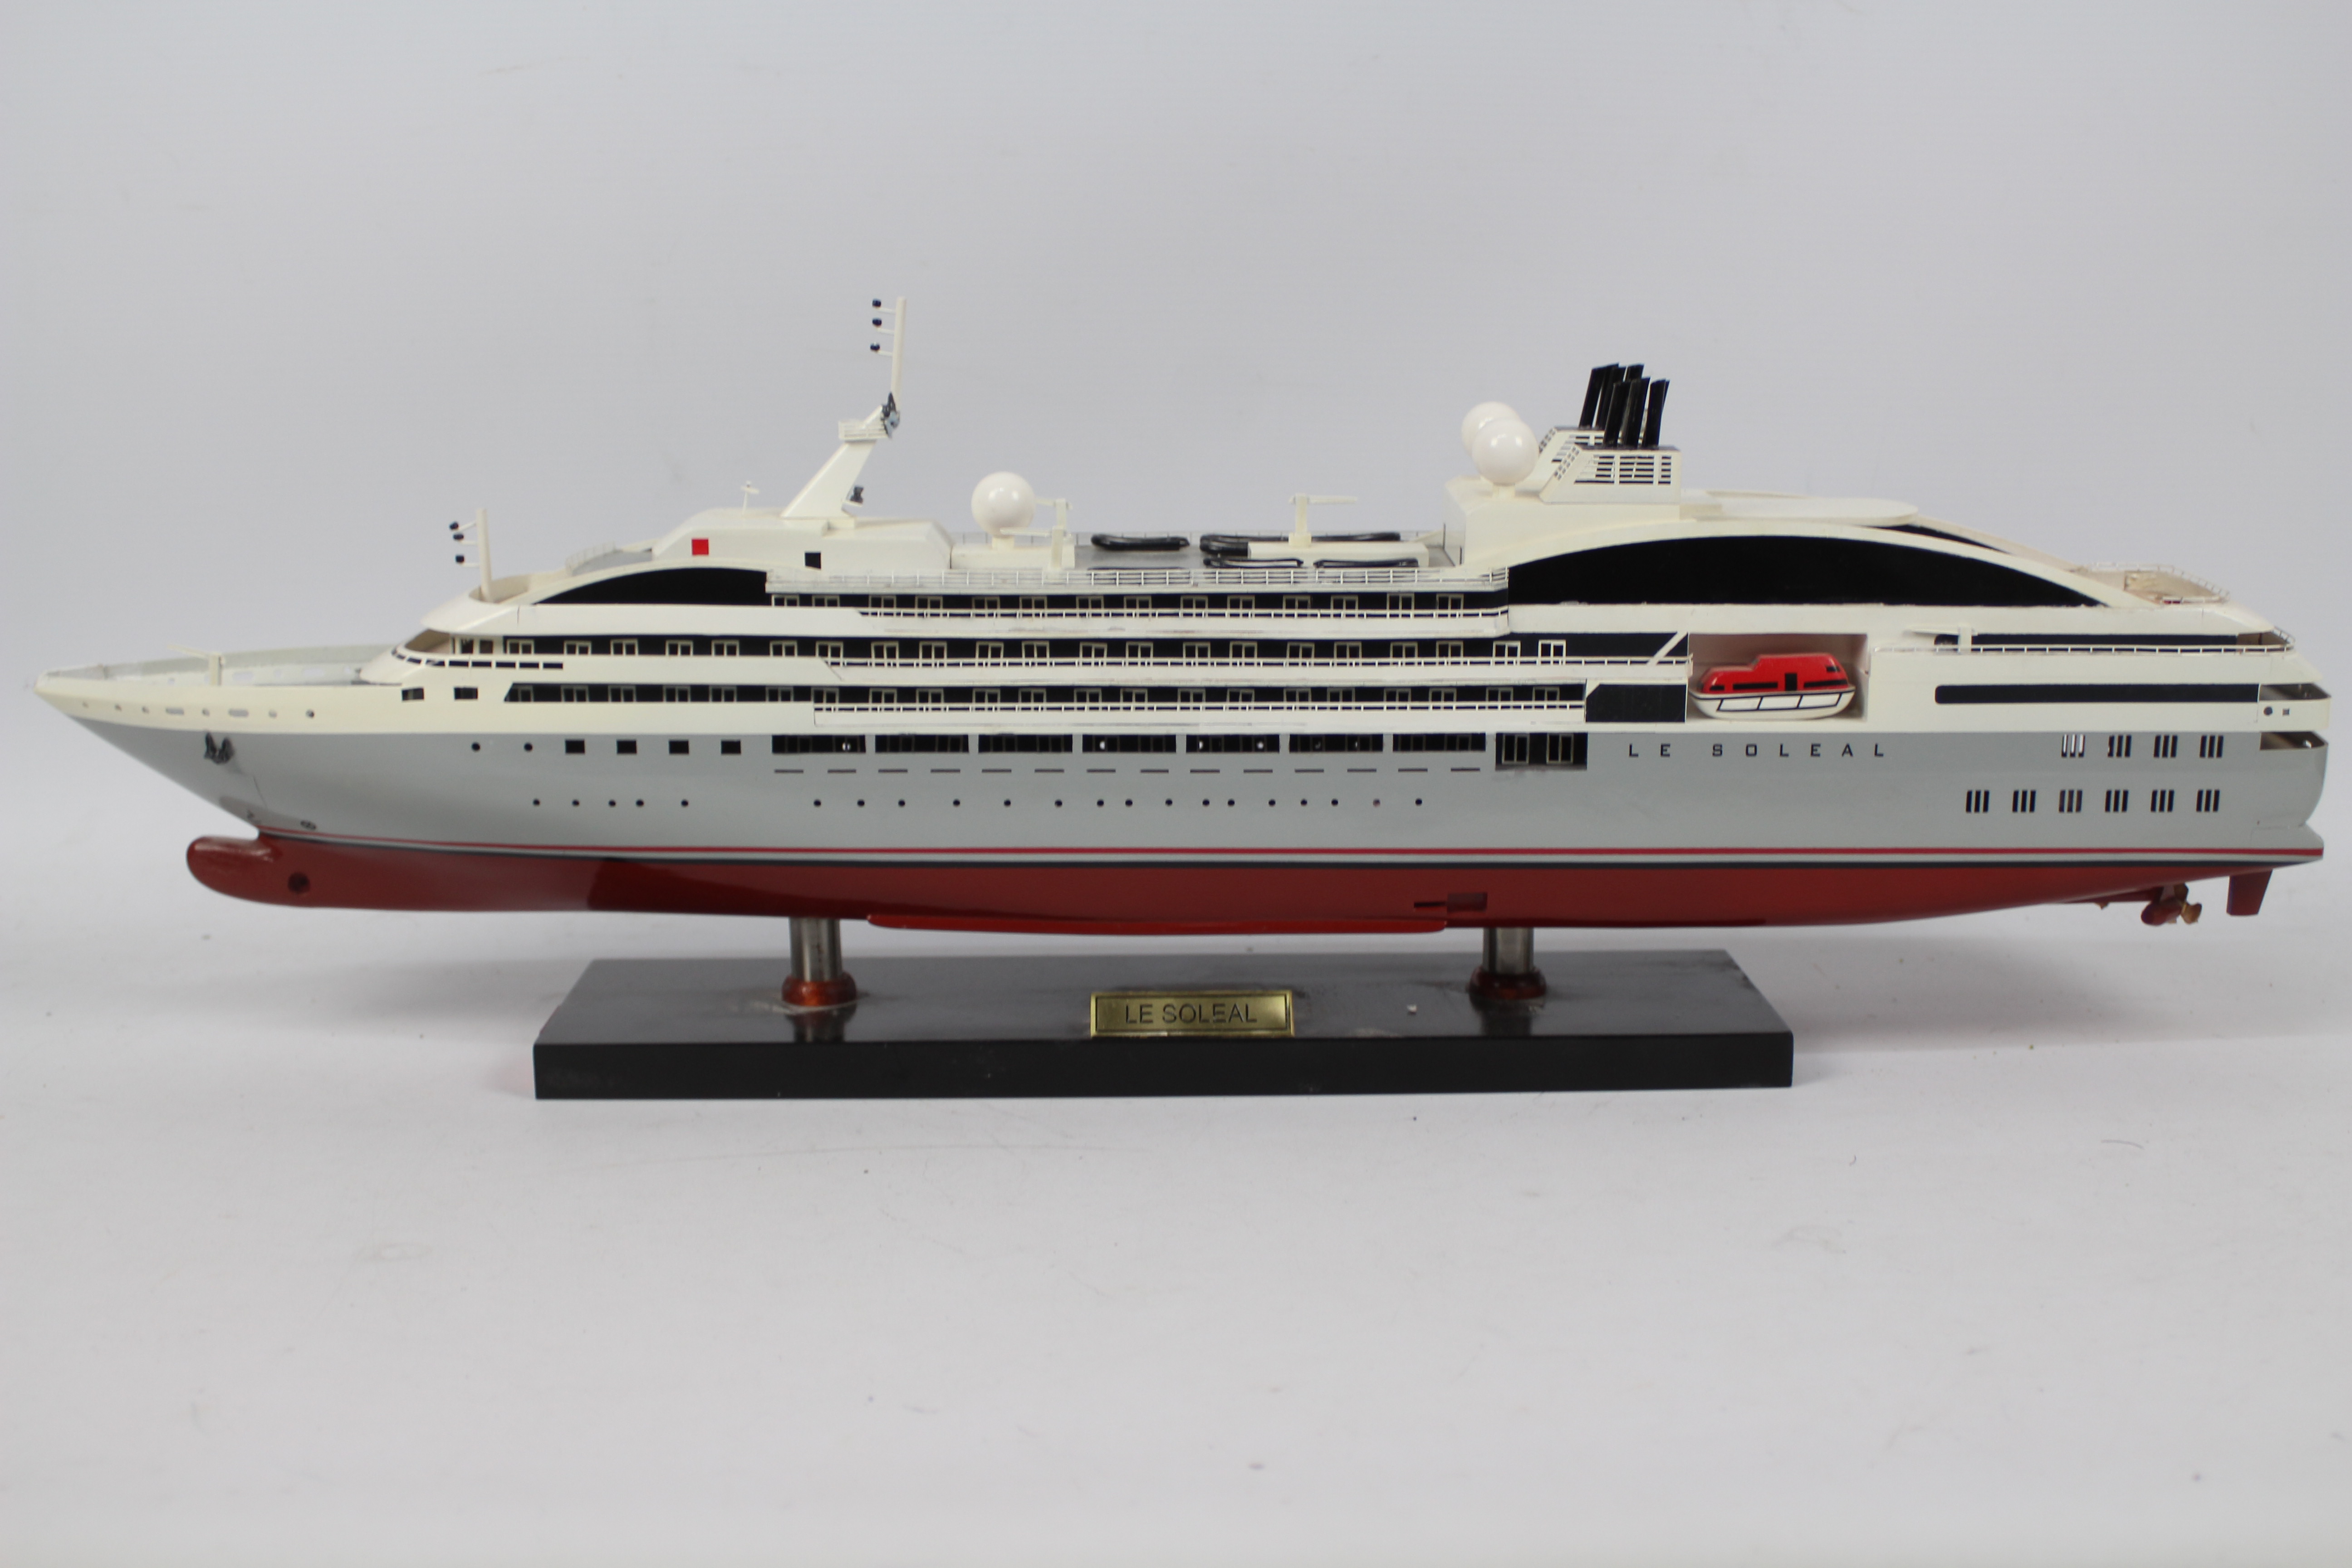 Le Soleal - A static display model of a Cruise Liner Le Soleal.